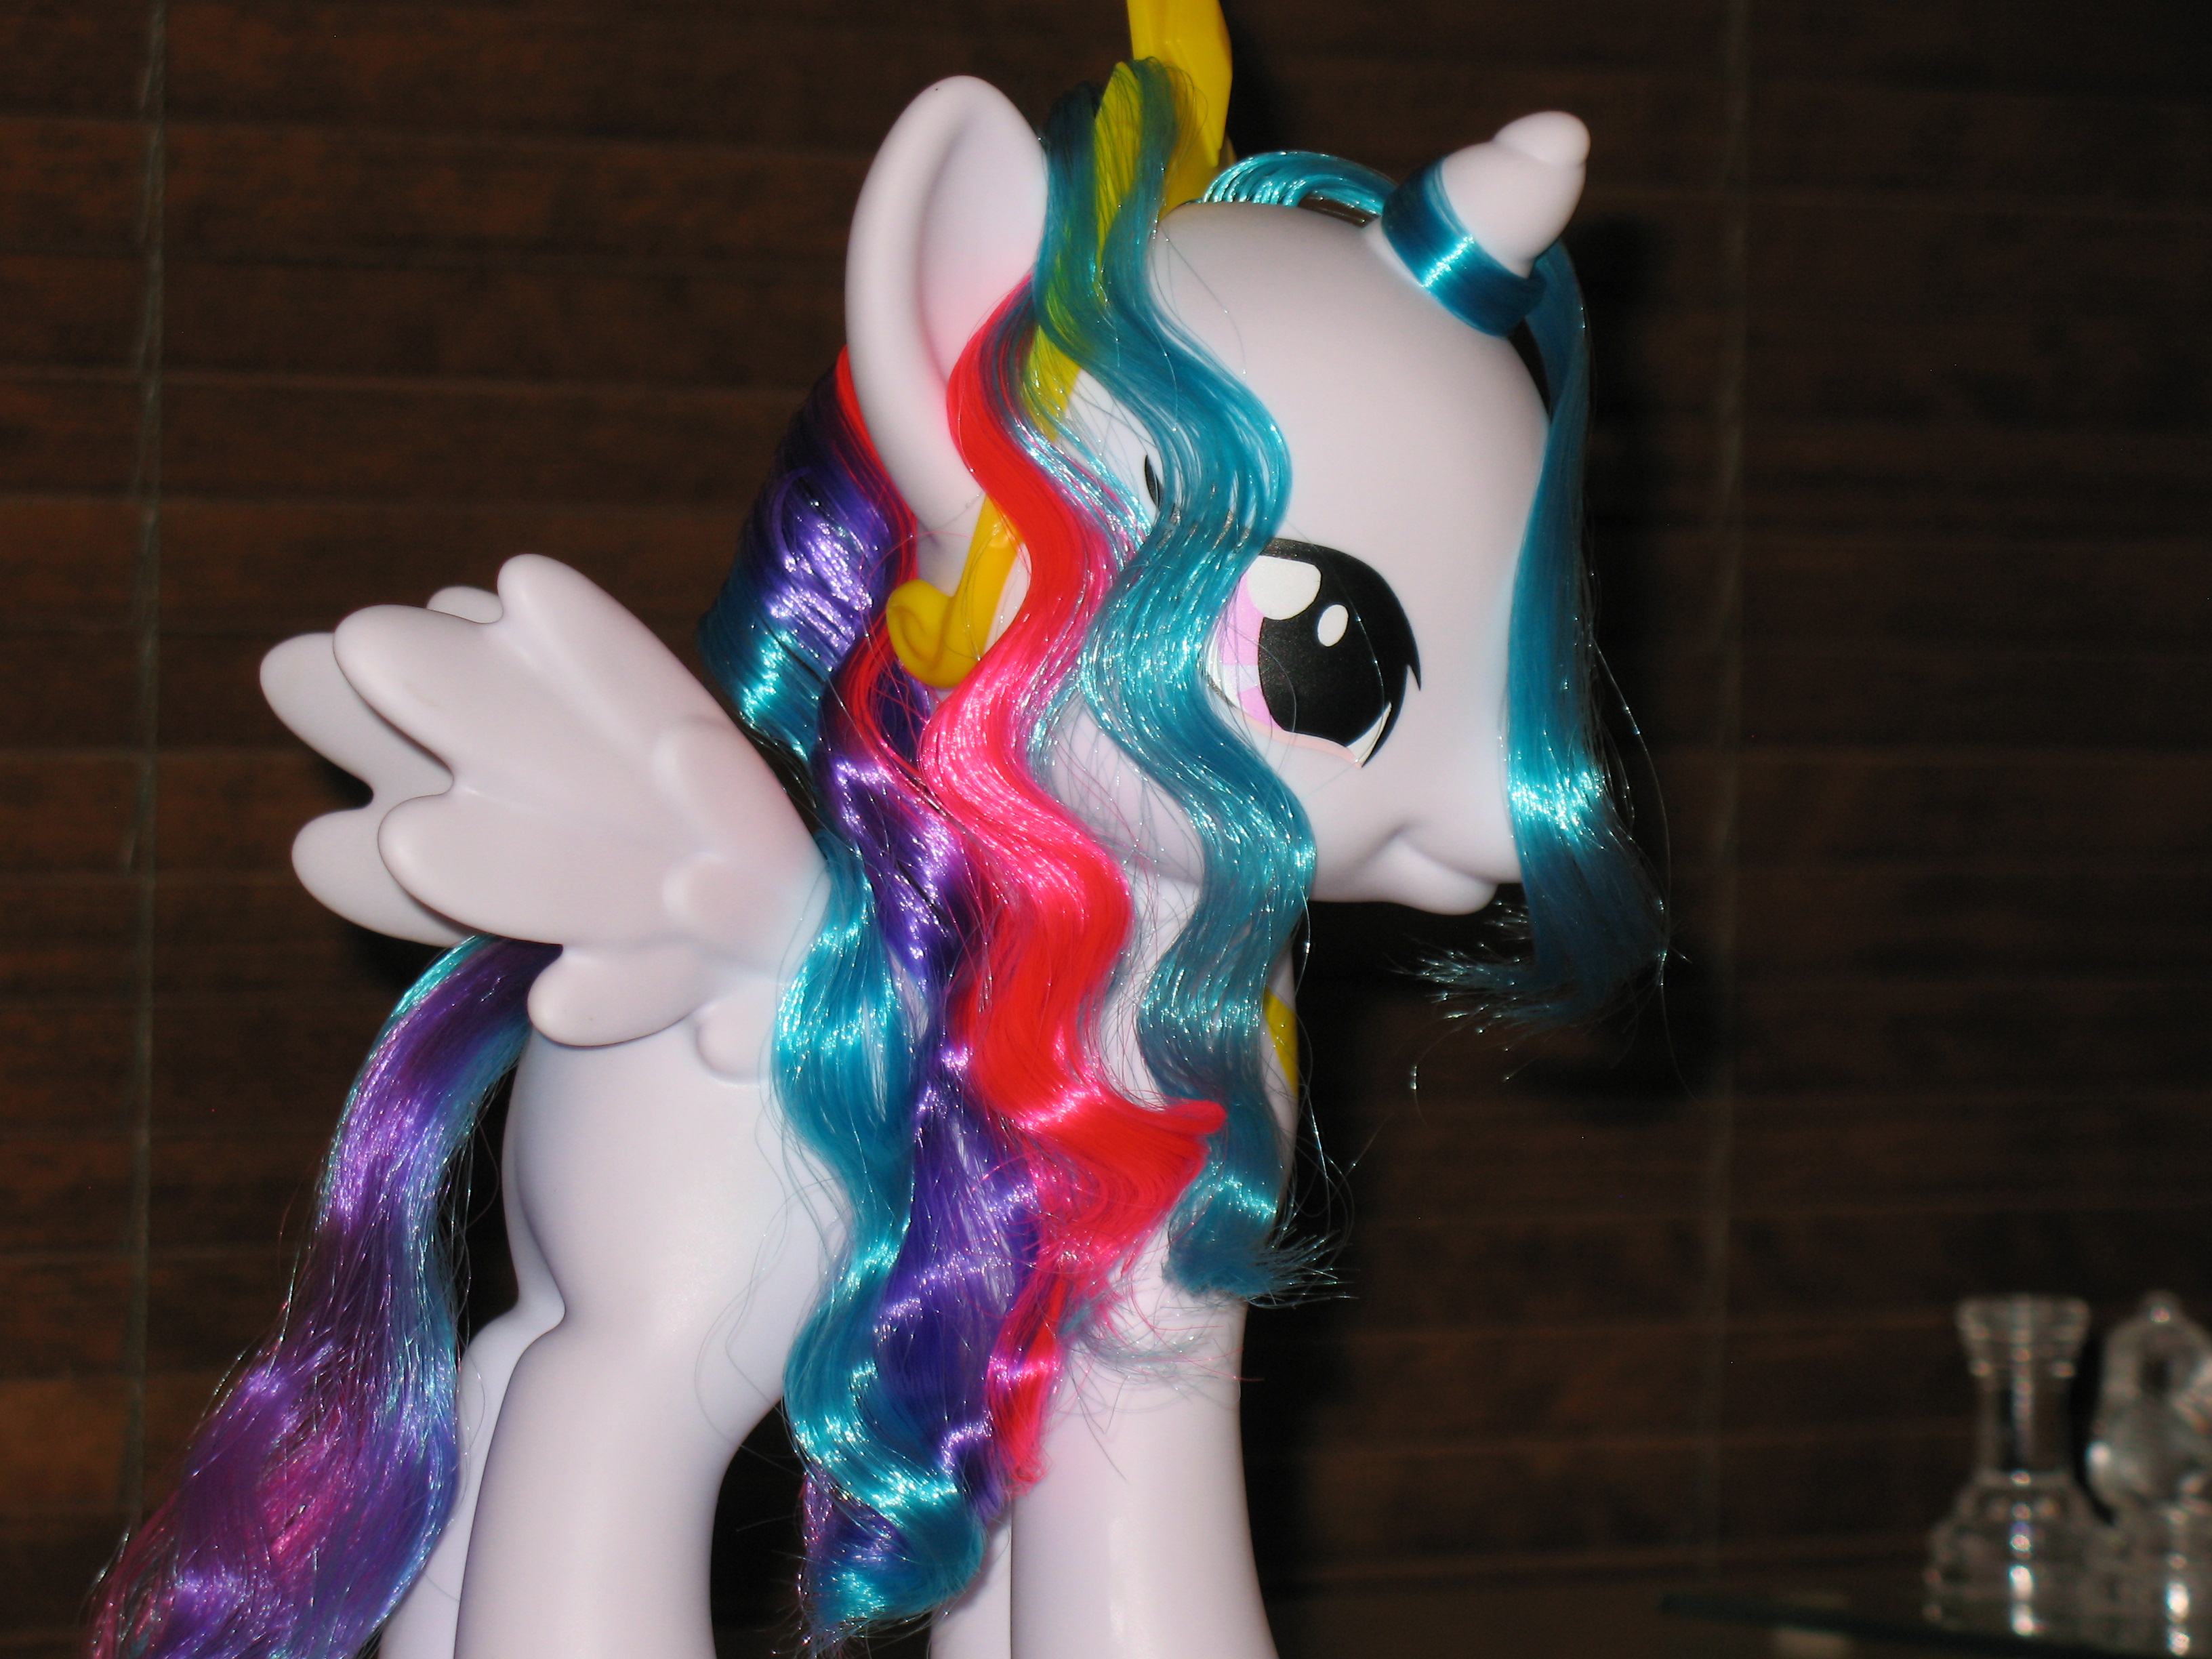 Where could I get Emo Celestia? - Merchandise - MLP Forums